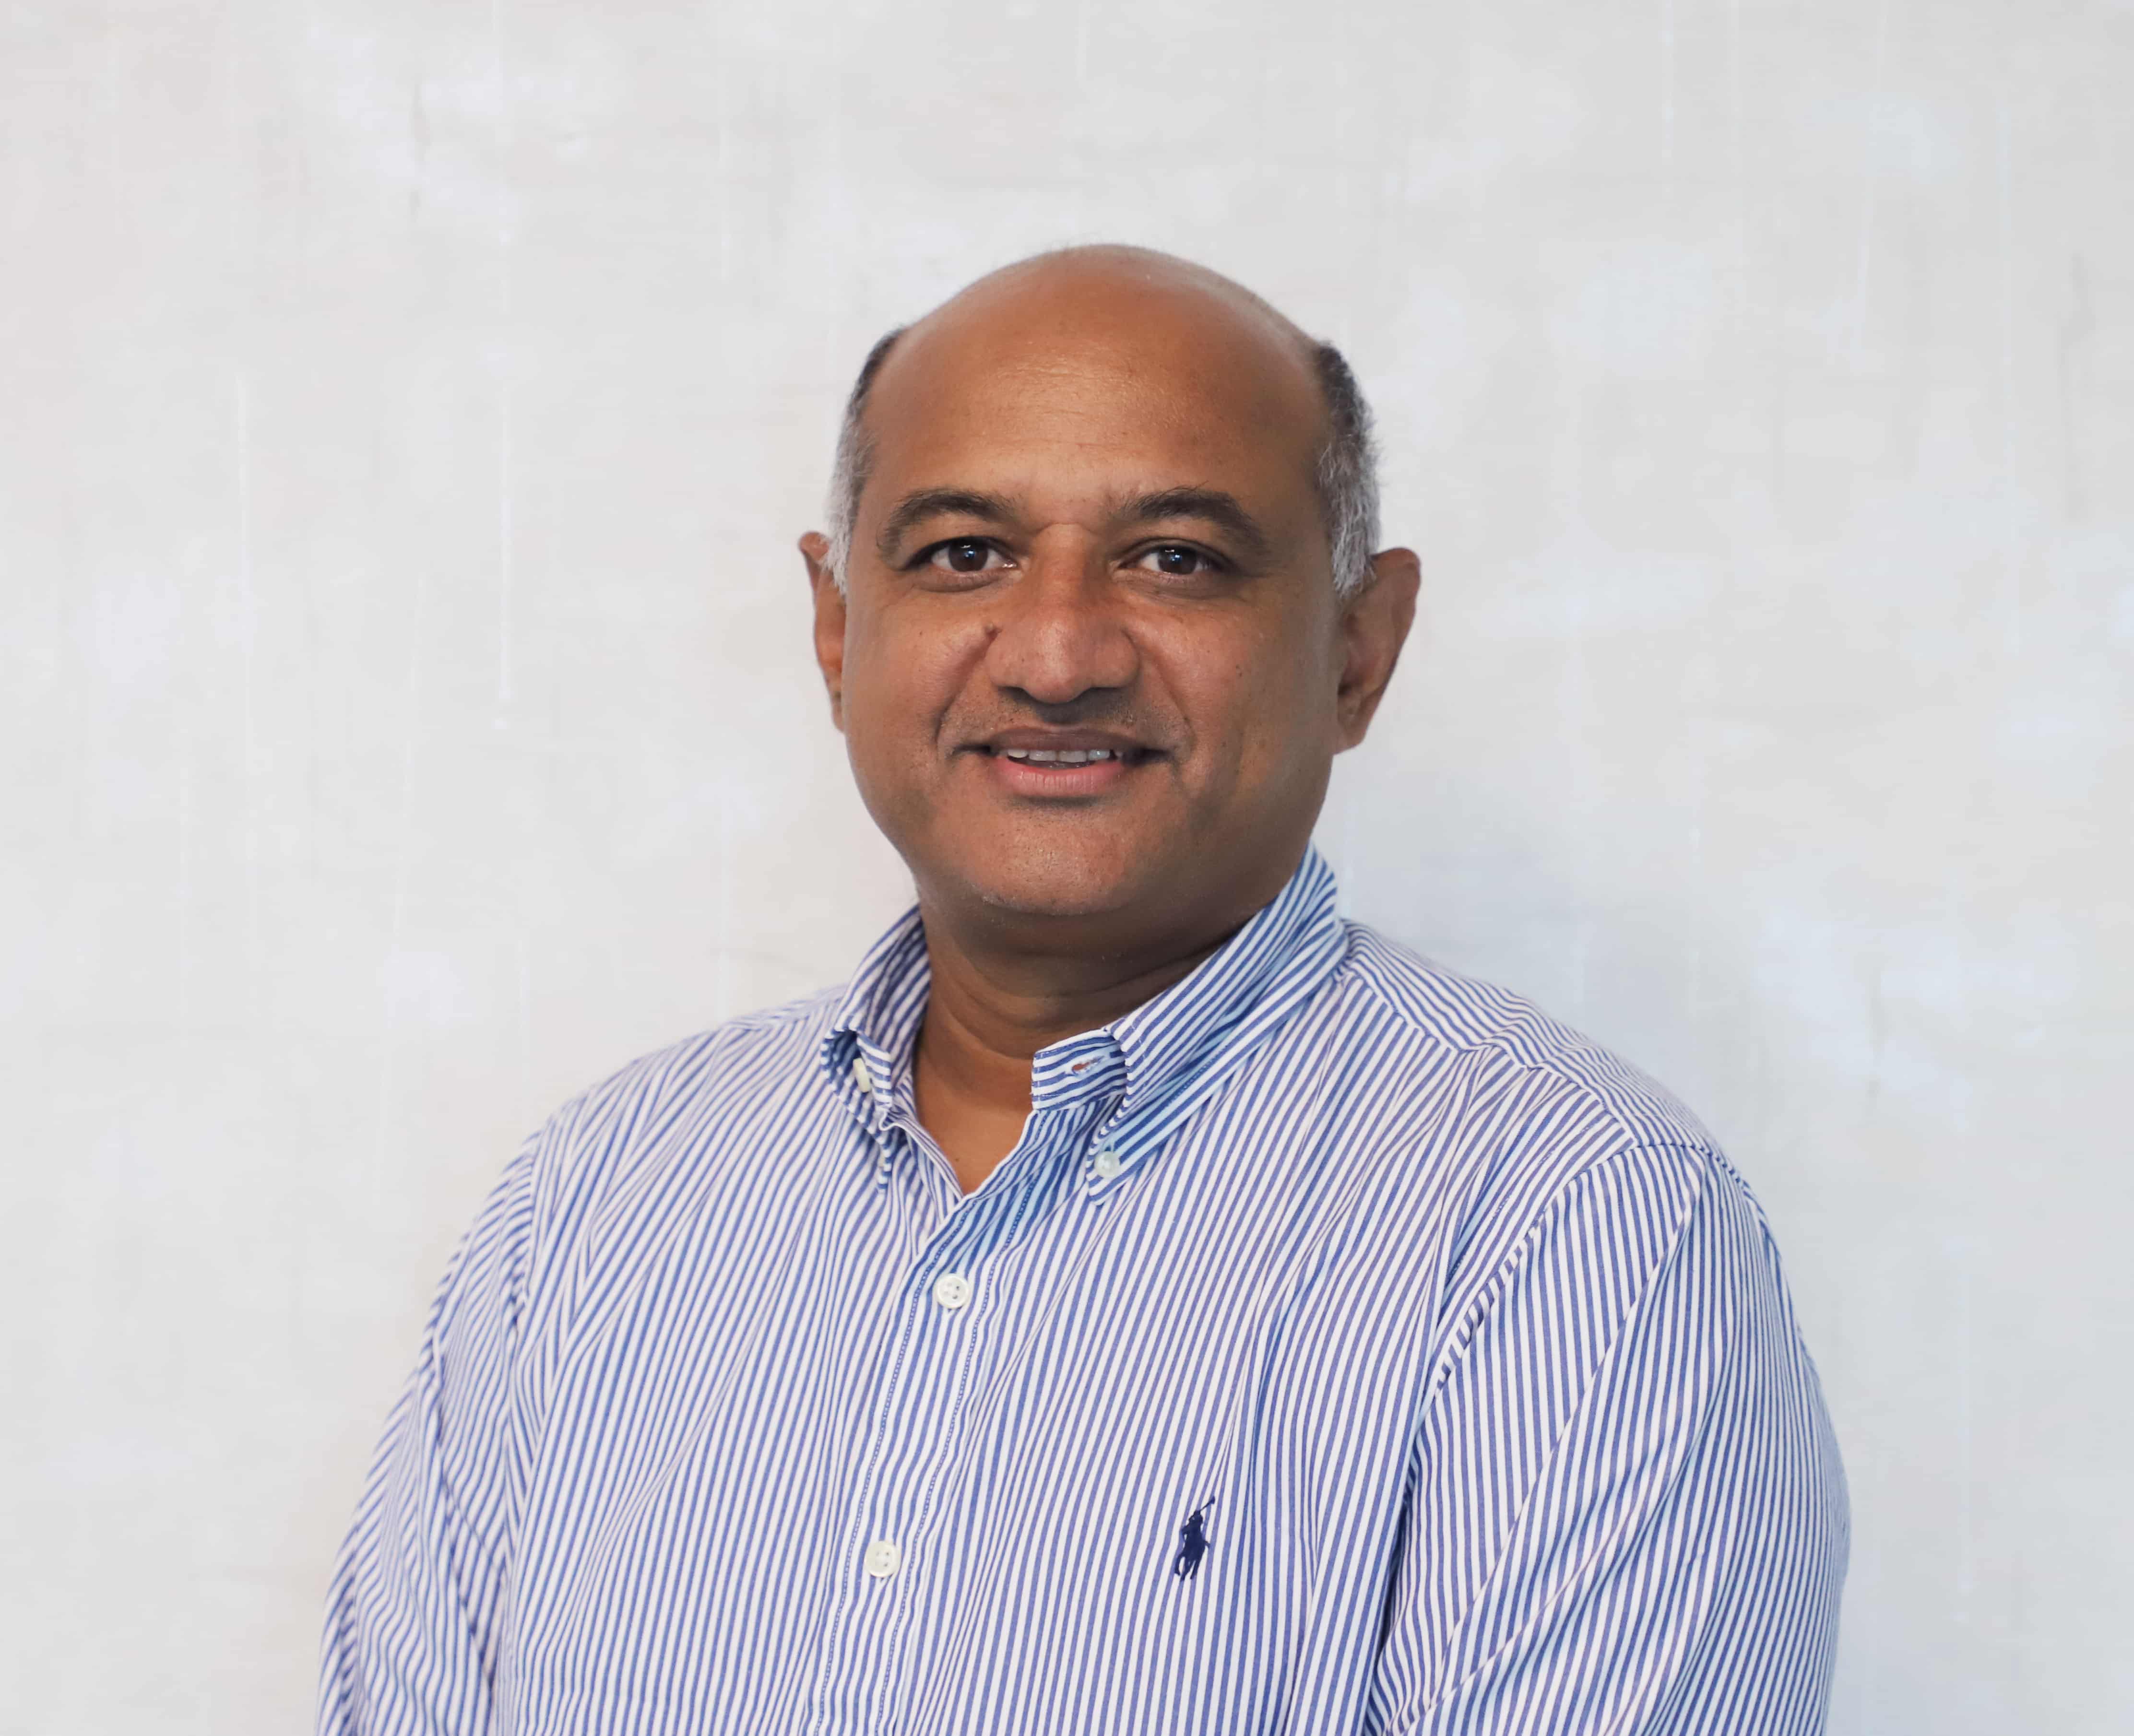 Amar Subash, Vice President and General Manager, HARMAN Professional Solutions APAC